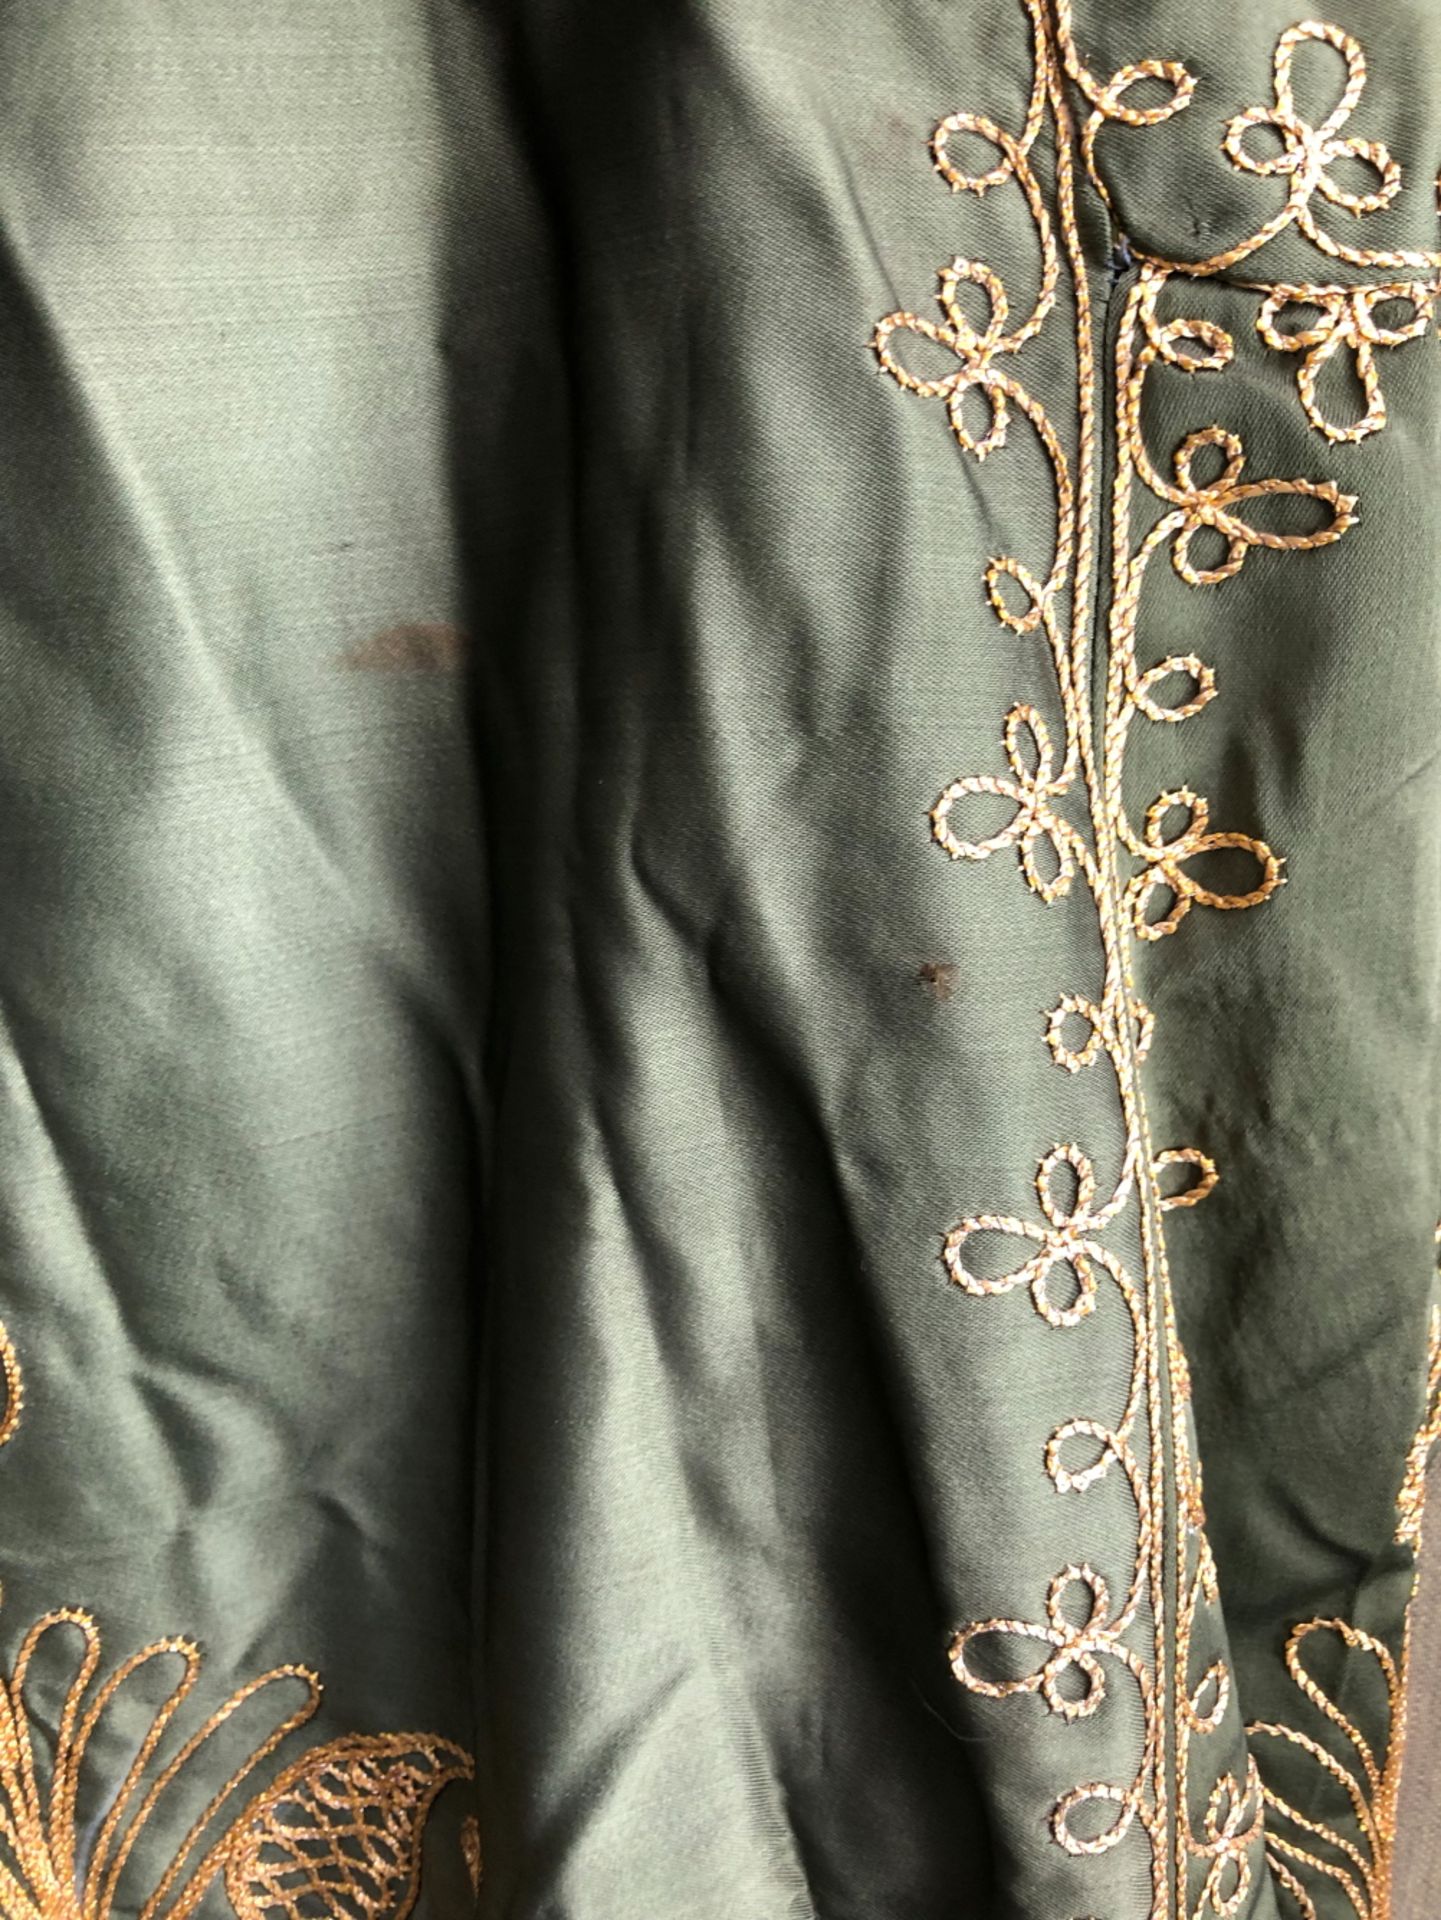 JACKET, AN INDIAN GREEN SILK JACKET EMBROIDERED IN GOLD THREAD, SLEEVE LENGTH 48cms, NECK TO HEM - Image 8 of 10